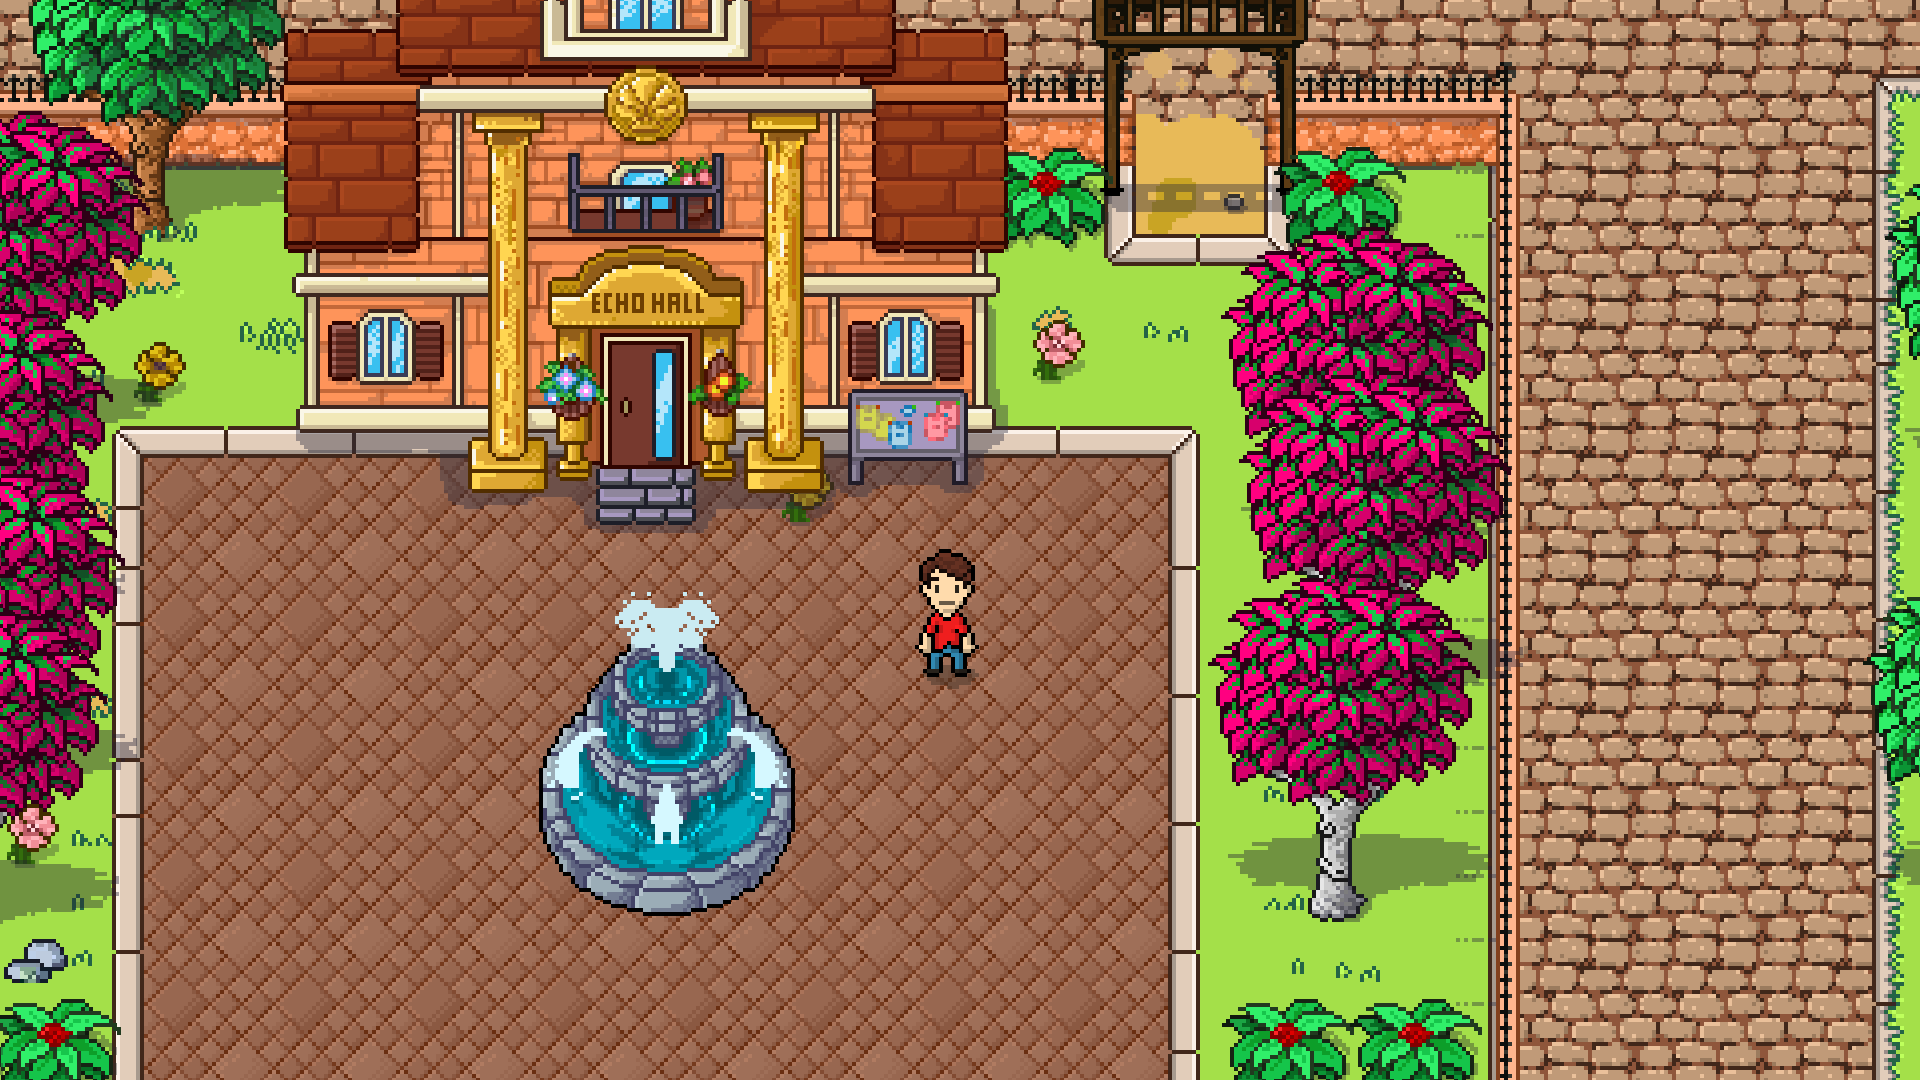 Main character standing out side the Echo Hall